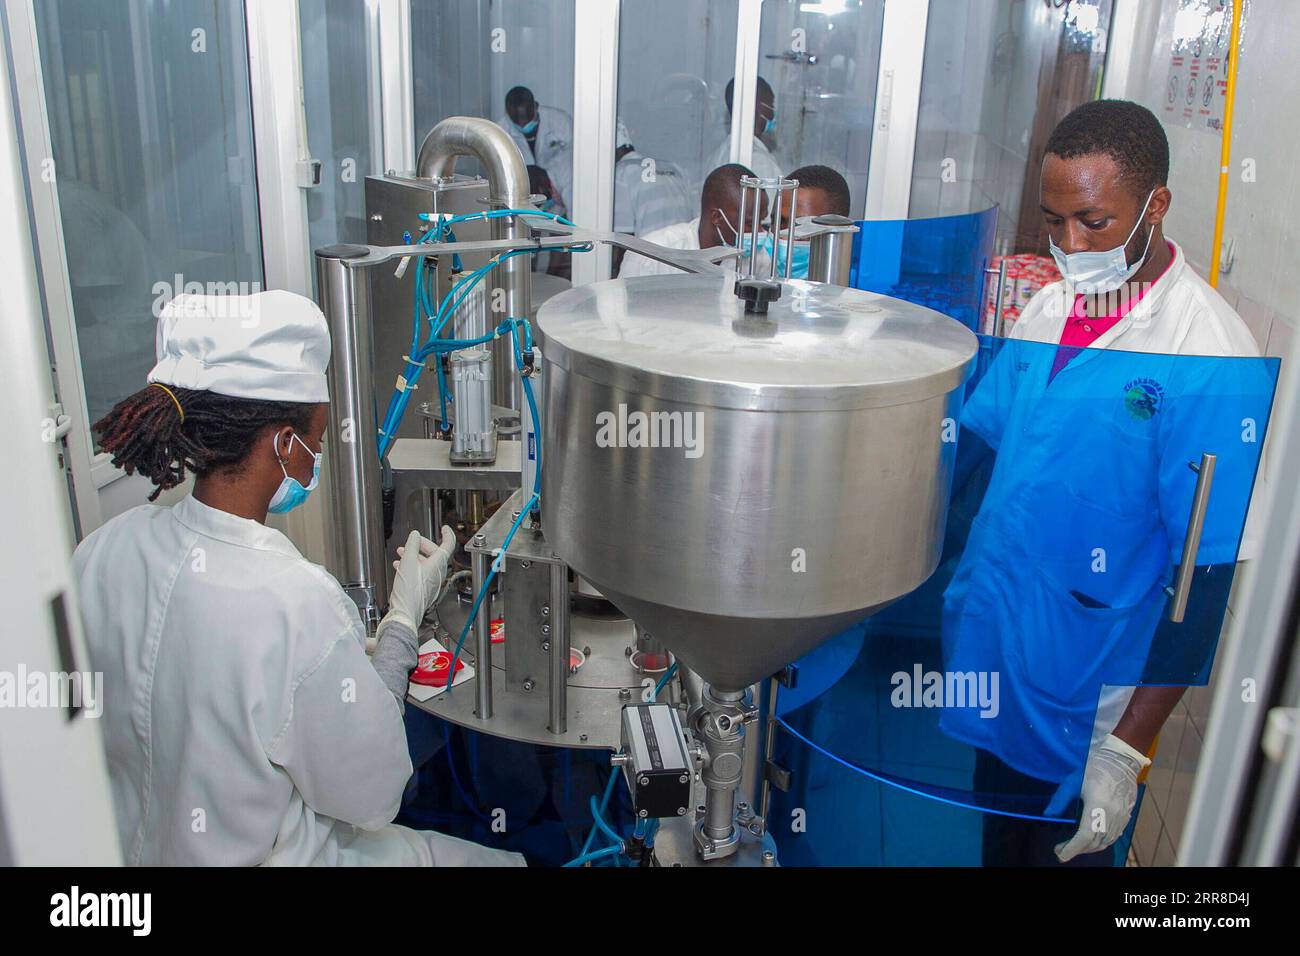 210502 -- NYANZA, May 2, 2021 -- Technicians package yogurt at Zirakamwa Meza Dairy in Nyanza district, about a two-hour drive from the Rwandan capital city Kigali, on April 30, 2021. TO GO WITH Feature: From genocide widow to successful businesswoman -- Rwandan woman walking out of shadow photo by /Xinhua RWANDA-NYANZA-GENOCIDE-BUSINESS WOMAN CyrilxNdegeya PUBLICATIONxNOTxINxCHN Stock Photo